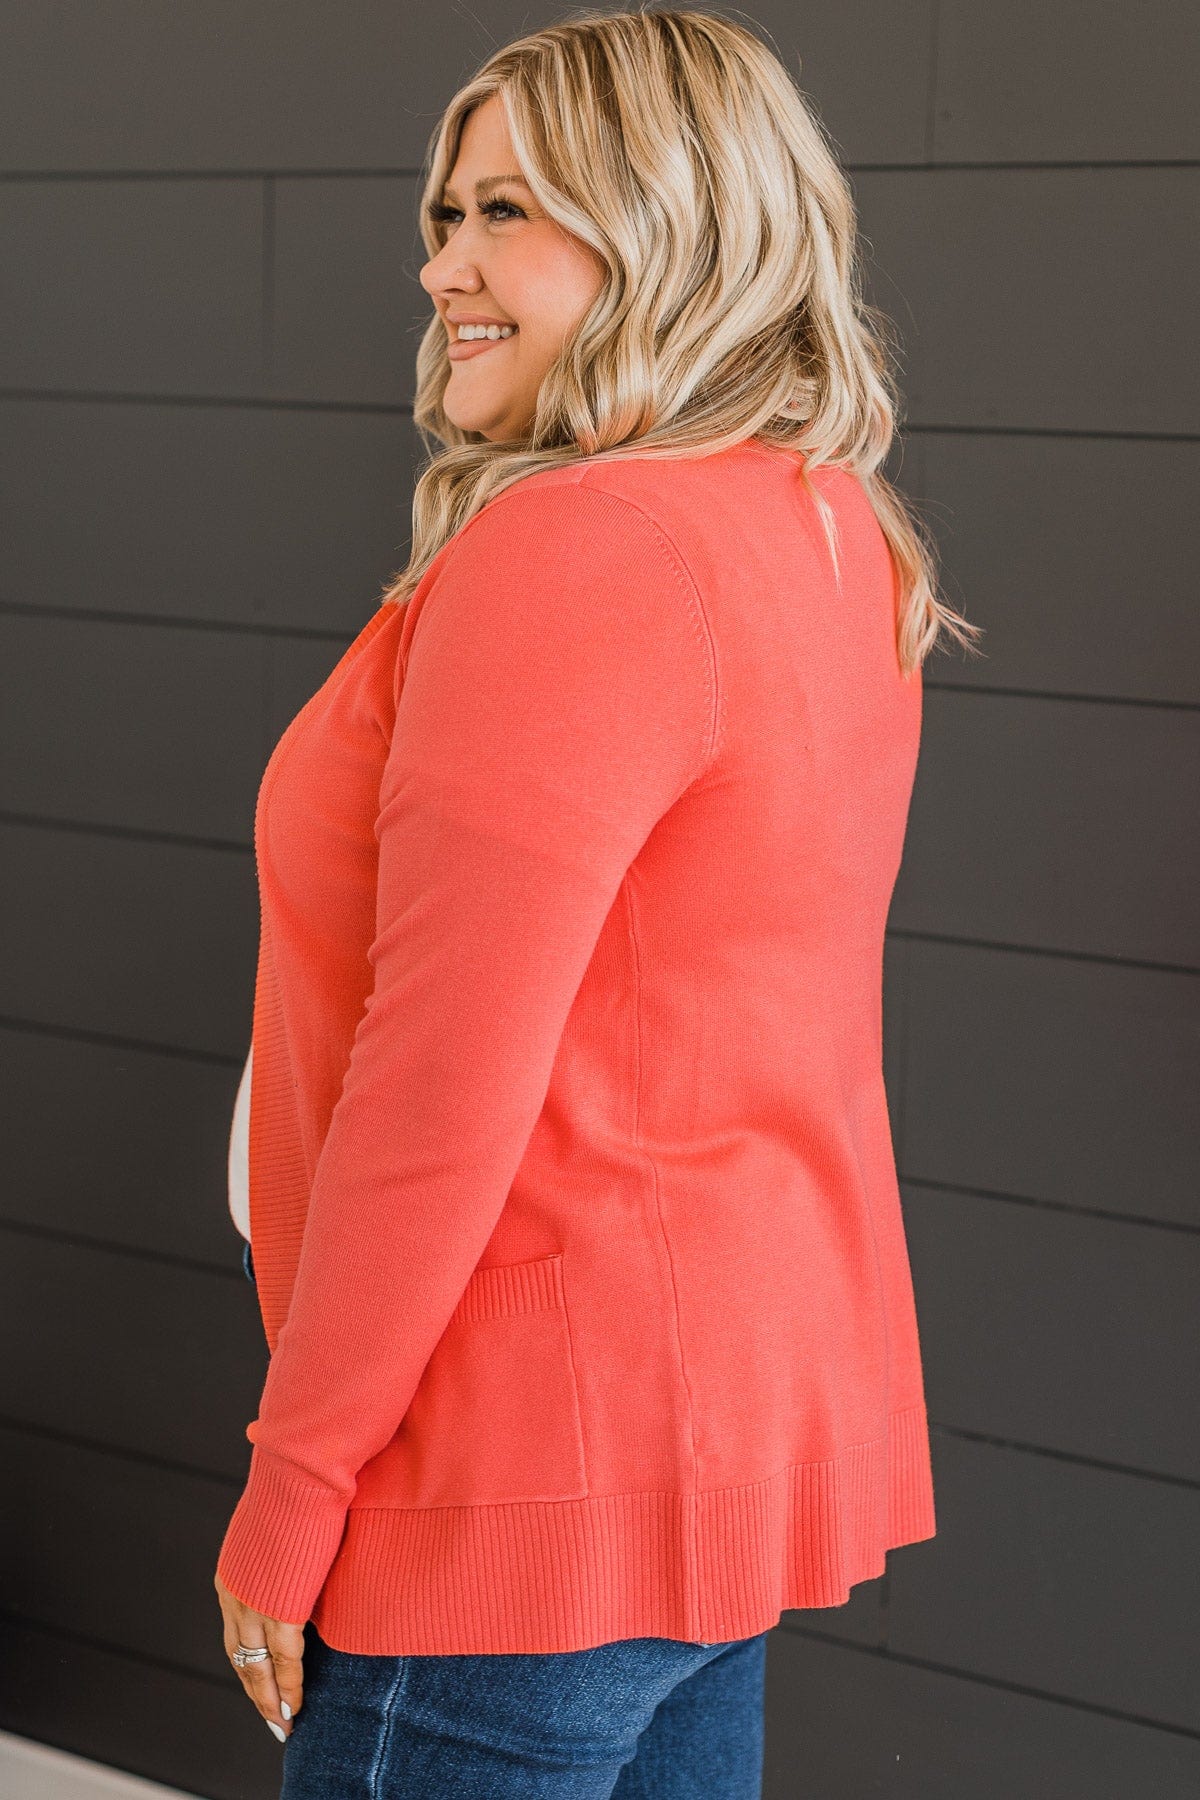 As Easy As Can Be Cardigan- Coral